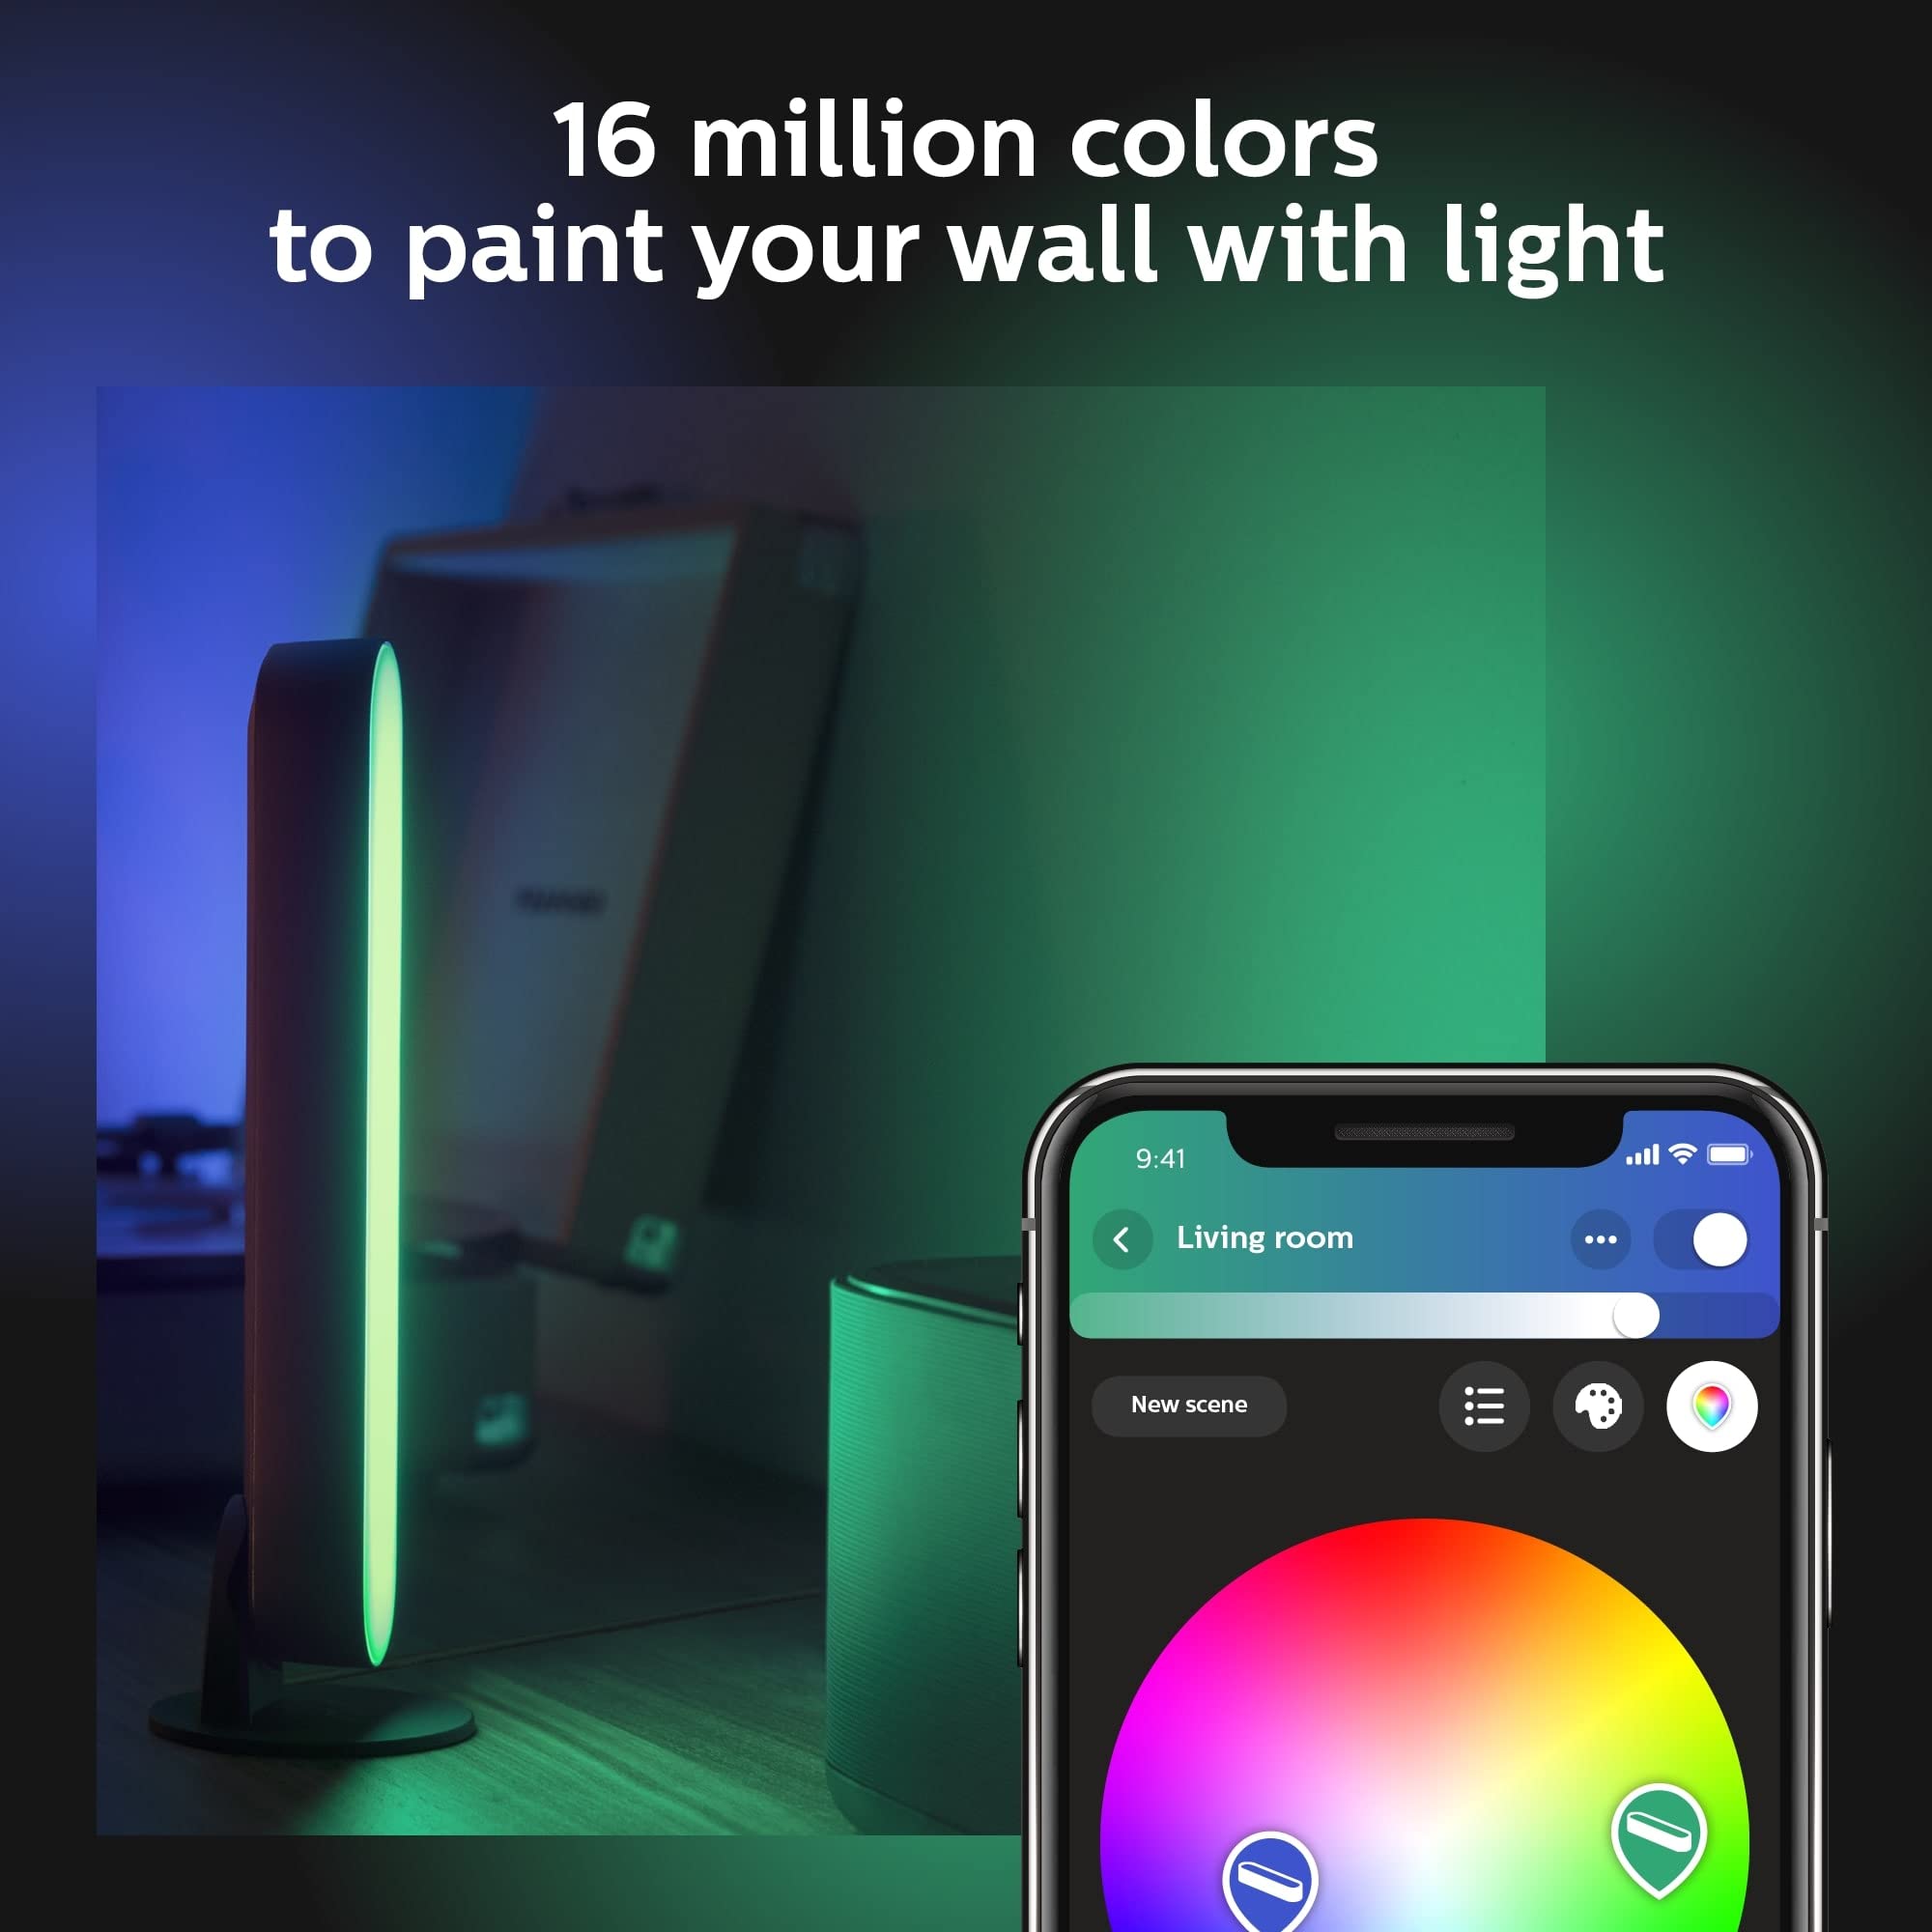 Philips Hue Play White & Color Smart Light, 2 Pack Base kit, Hub Required/Power Supply Included (Works with Amazon Alexa, Apple Homekit & Google Home), Black, Base Kit, 2 Pack